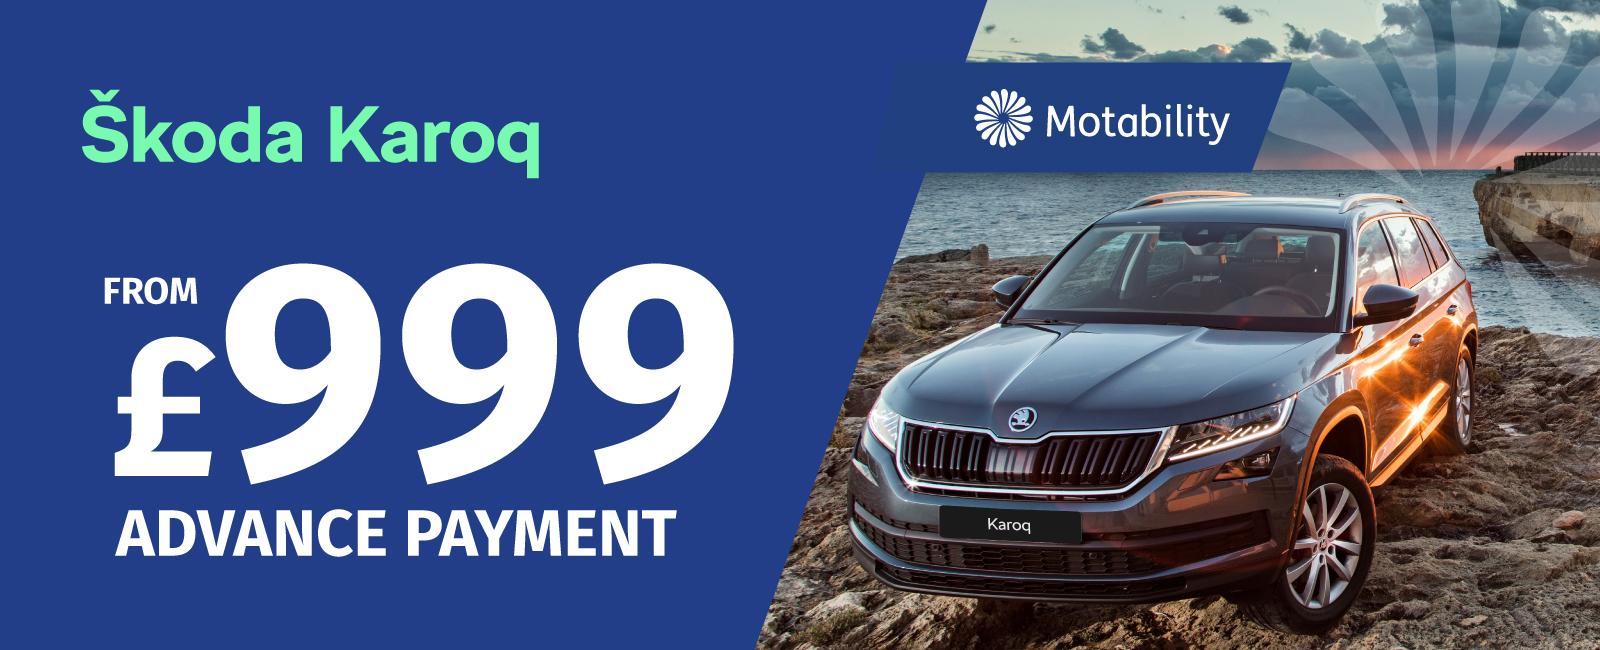 The Skoda Karoq from £999 advance payment on the Motability Scheme